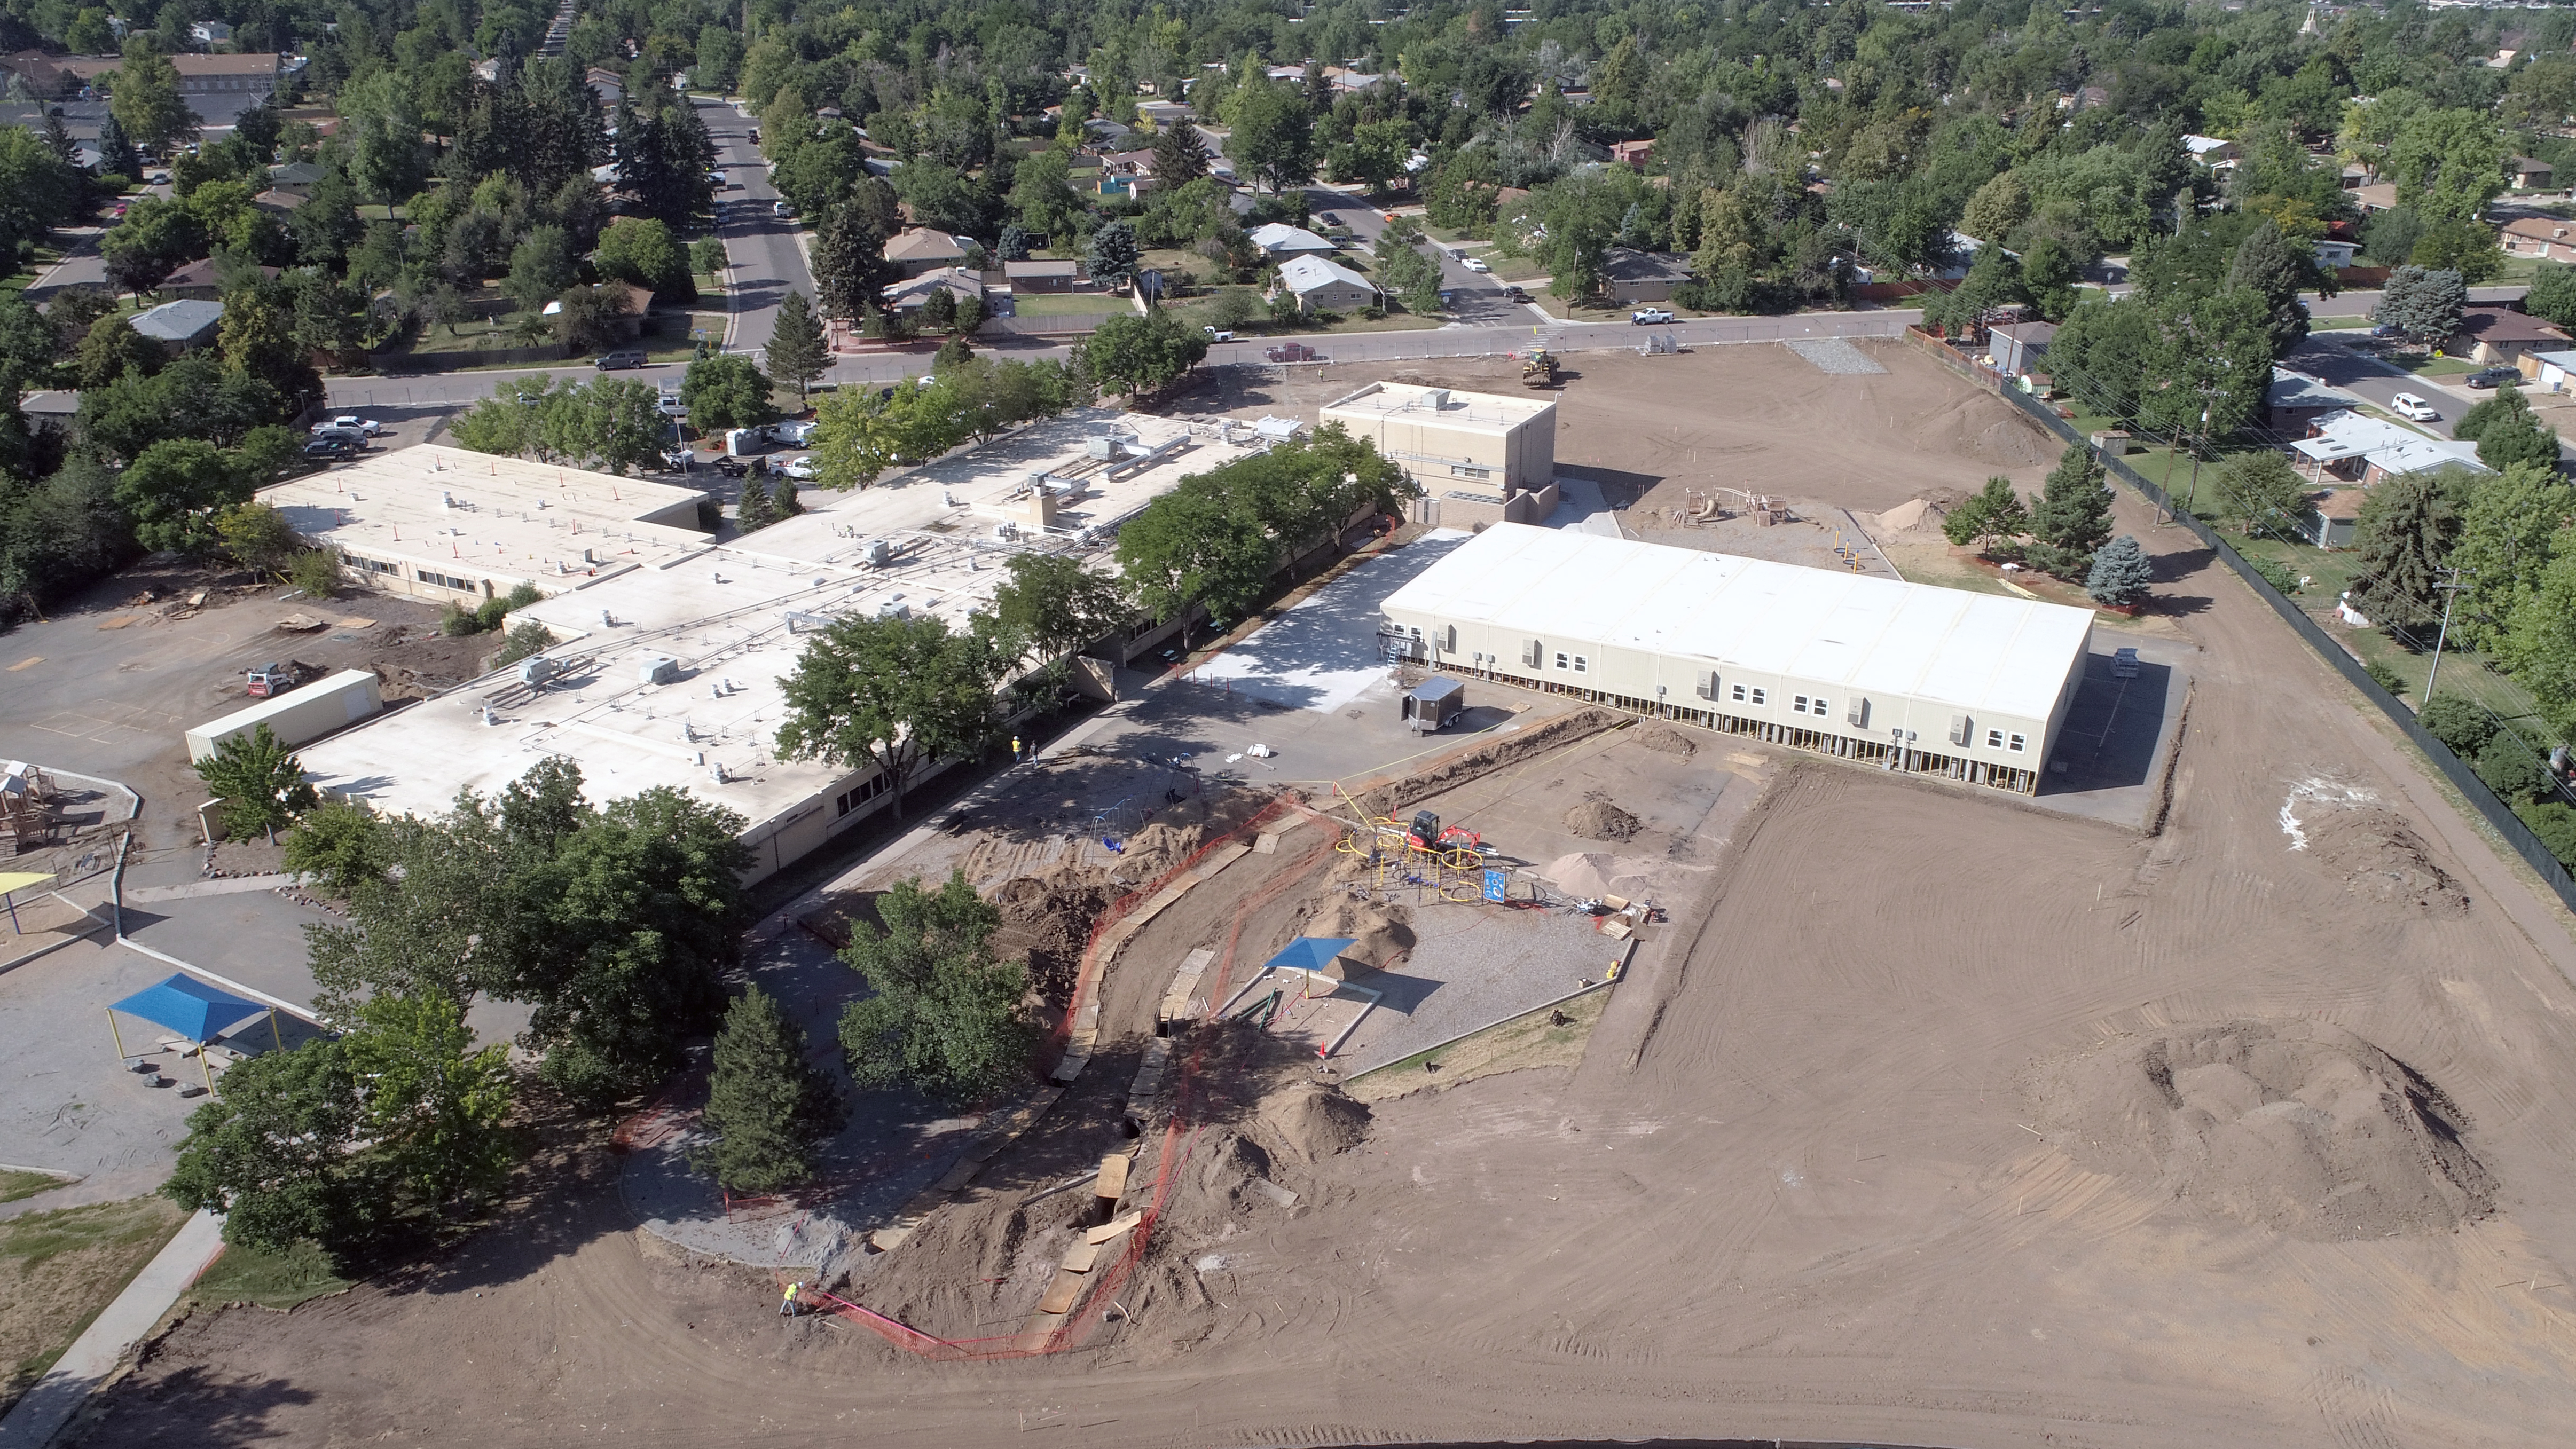 Highland temporary wing in place July 25, 2019